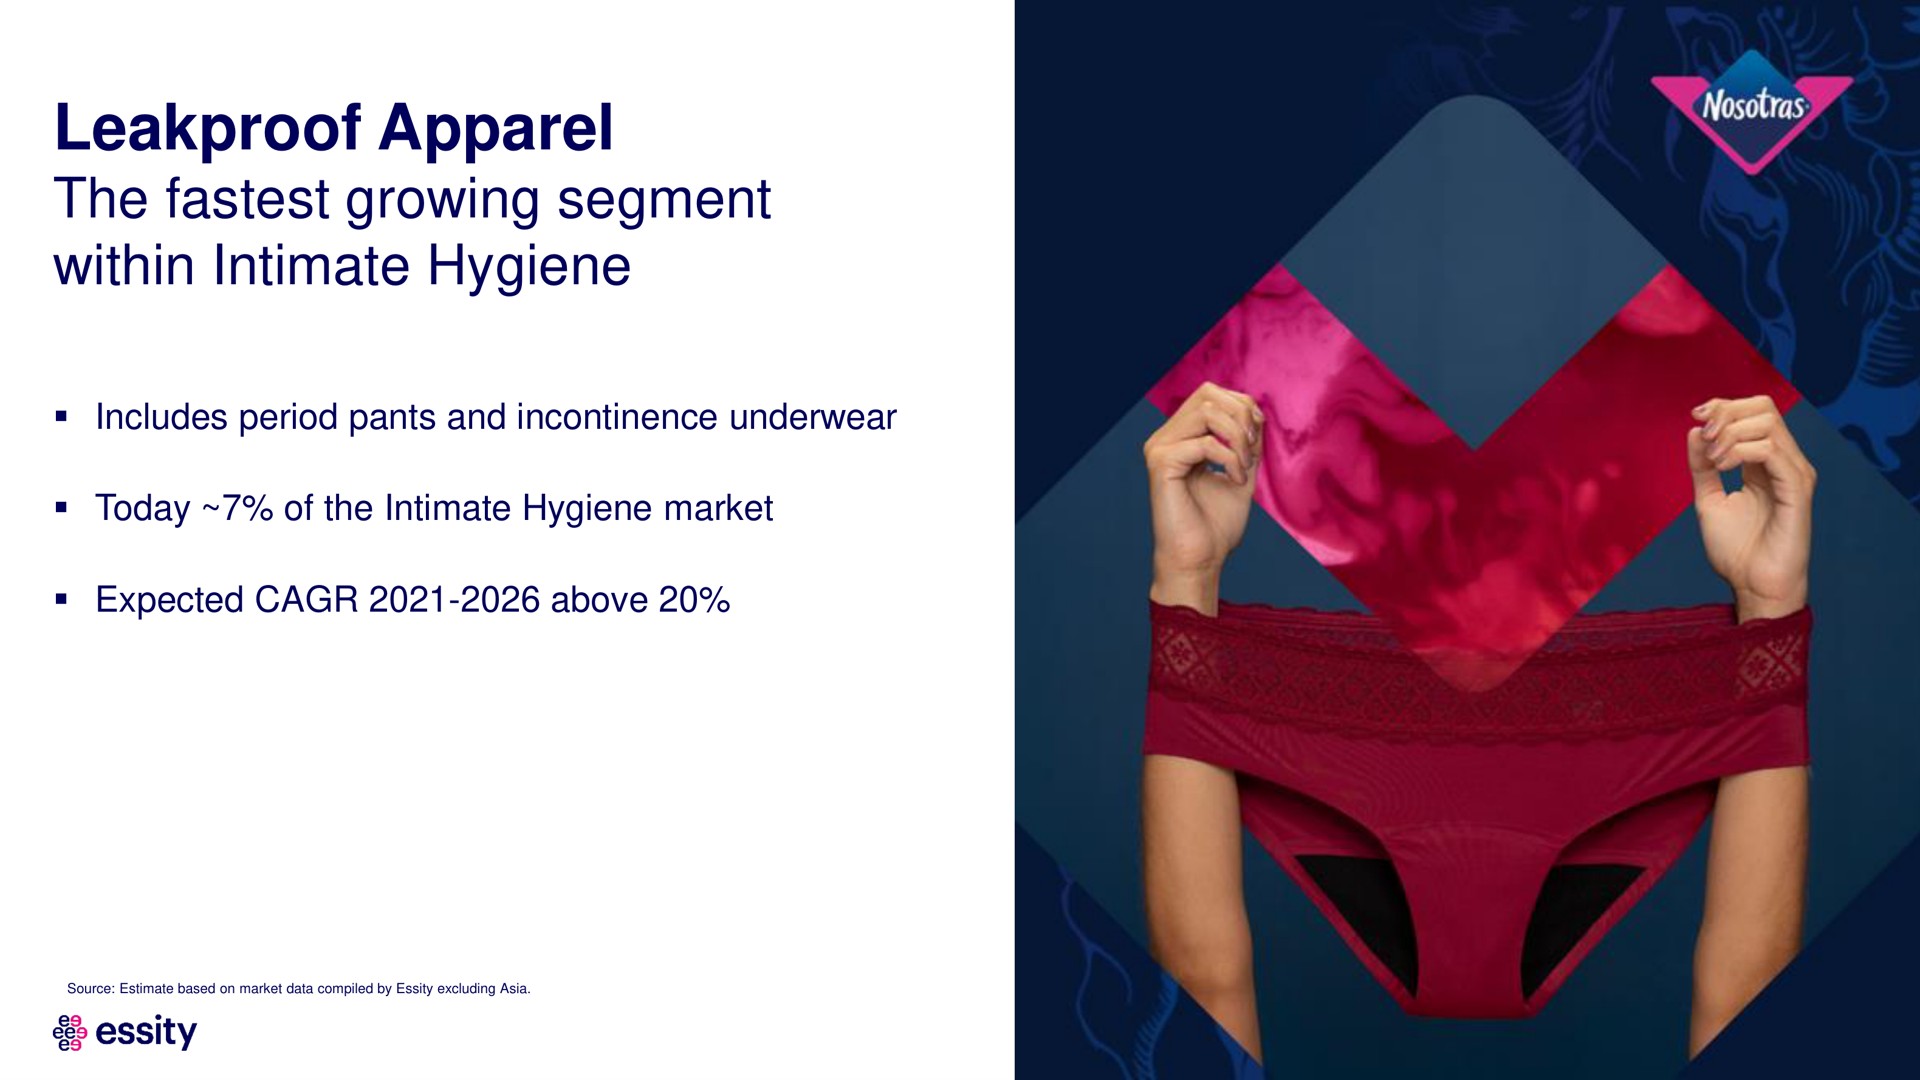 leakproof apparel the growing segment within intimate hygiene | Essity